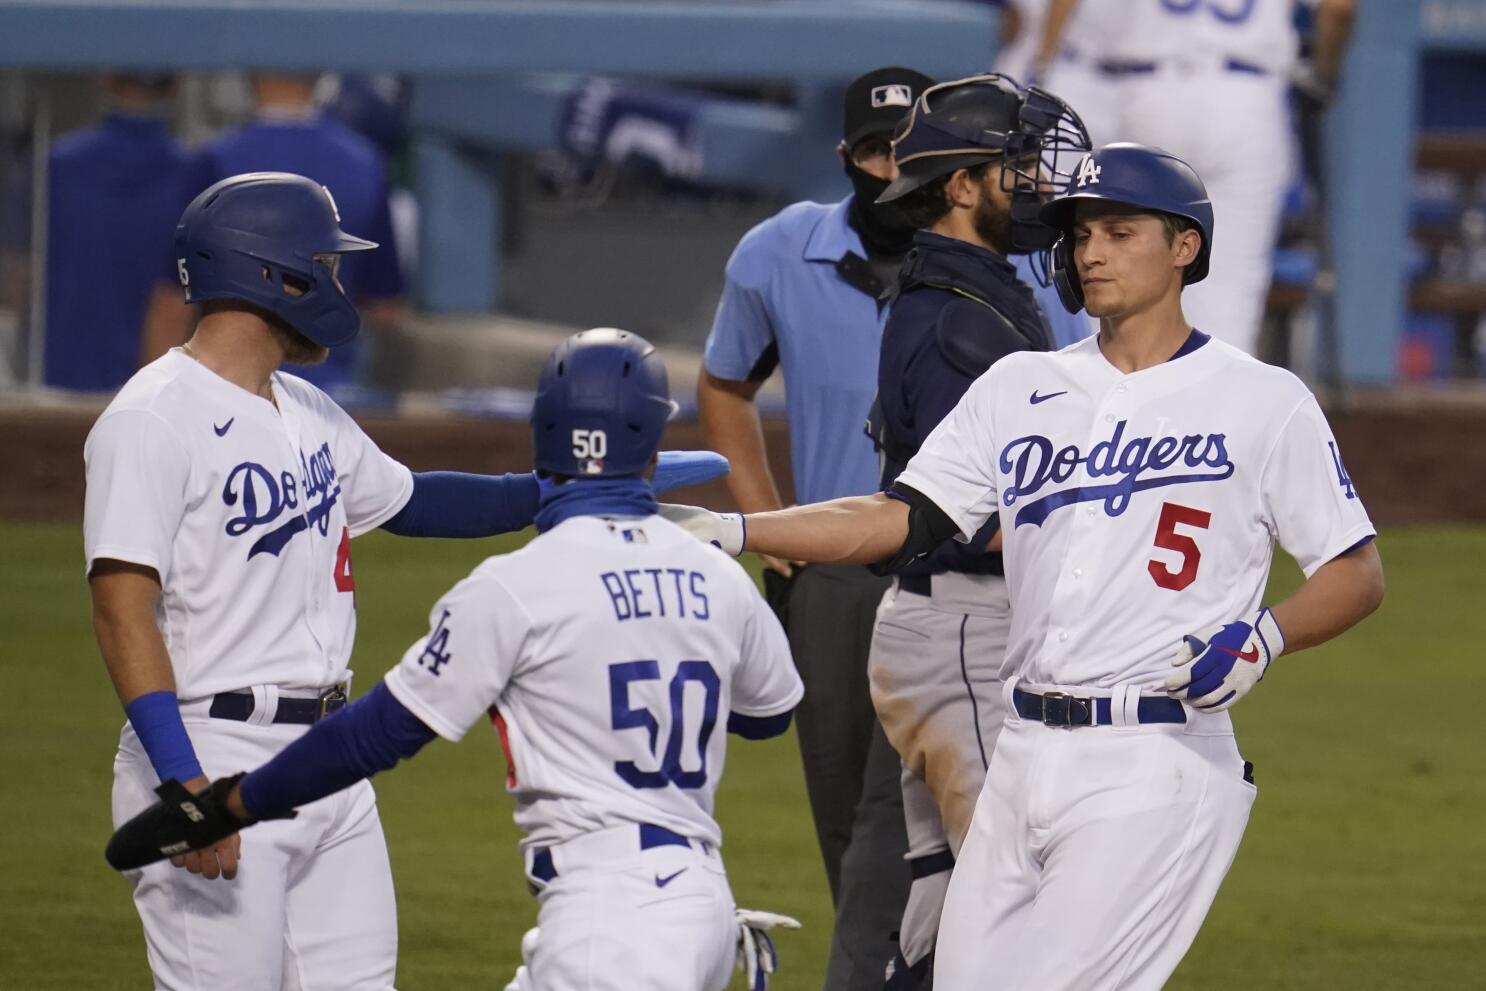 Corey Seager Interview: Los Angeles Dodgers Star Talks Country